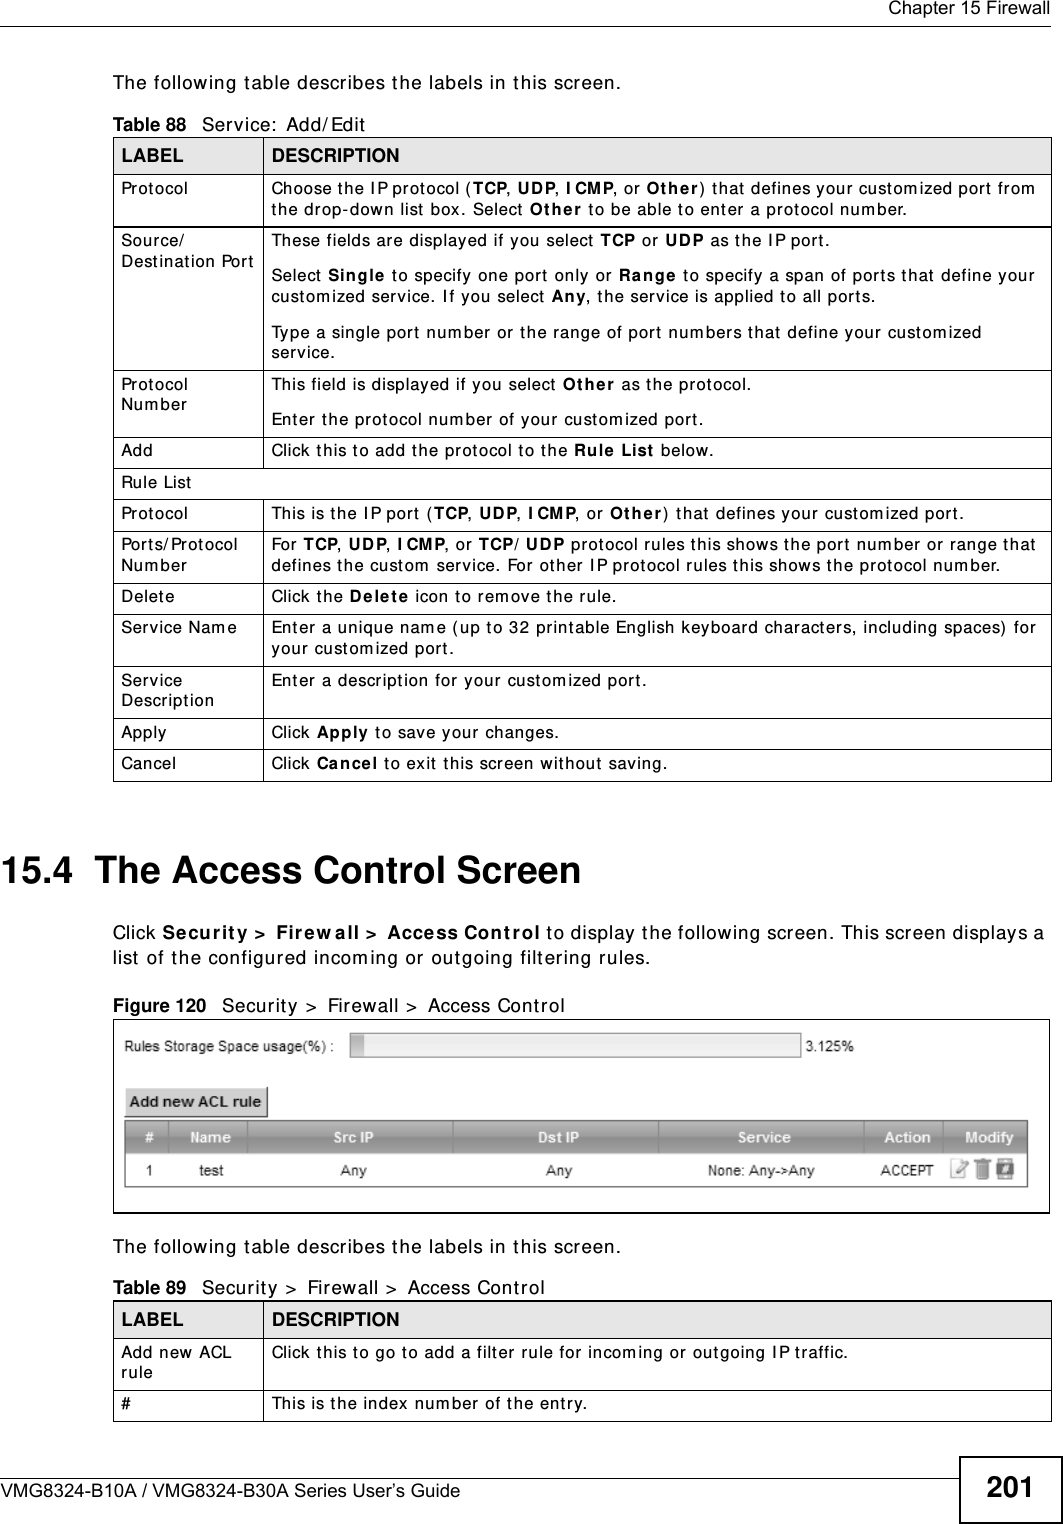  Chapter 15 FirewallVMG8324-B10A / VMG8324-B30A Series User’s Guide 201The following t able describes t he labels in this screen.15.4  The Access Control ScreenClick Securit y &gt;  Fire w all &gt;  Acce ss Cont rol t o display t he following screen. This scr een displays a list  of the configured incom ing or outgoing filt ering rules. Figure 120   Security &gt;  Firewall &gt;  Access Control The following t able describes t he labels in this screen. Table 88   Service:  Add/ EditLABEL DESCRIPTIONProt ocol Choose t he I P protocol ( TCP, UD P, I CM P, or O t he r ) t hat  defines your custom ized port  from  the drop-down list  box . Select  Ot h er  t o be able t o ent er a prot ocol num ber.Source/Dest ination PortThese fields are displayed if you select  TCP or UDP as the I P port . Select  Single  t o specify one port  only or Ra nge to specify a span of port s t hat define your cust om ized service. I f you select  An y, t he service is applied t o all ports.Type a single port num ber or the range of por t  num bers t hat  define your custom ized service.Prot ocol Nu m berThis field is displayed if you select O t he r as the protocol.Enter t he prot ocol num ber of your cust om ized port . Add Click t his t o add the prot ocol to t he Ru le List  below.Rule ListProt ocol This is t he I P port (TCP, UD P, I CMP, or Ot h e r)  t hat  defines your cust om ized port .Port s/ Prot ocol Nu m berFor  TCP, UDP, I CMP, or TCP/ UDP protocol rules t his shows the port  num ber or range t hat  defines t he cust om  service. For other I P protocol rules this shows t he prot ocol num ber. Delet e Click t he Dele t e icon t o rem ove t he rule.Service Nam e Ent er  a unique nam e ( up t o 32 print able English keyboard charact ers, including spaces)  for your  cust om ized port . Service Descript ionEnt er a descript ion for your cust om ized port .Apply Click Apply t o save your changes.Cancel Click Ca nce l to exit  t his screen w it hout saving.Table 89   Securit y &gt;  Firewall &gt;  Access Cont rolLABEL DESCRIPTIONAdd new ACL ruleClick t his t o go t o add a filter rule for incom ing or outgoing I P traffic.#This is t he index  num ber of t he entry.